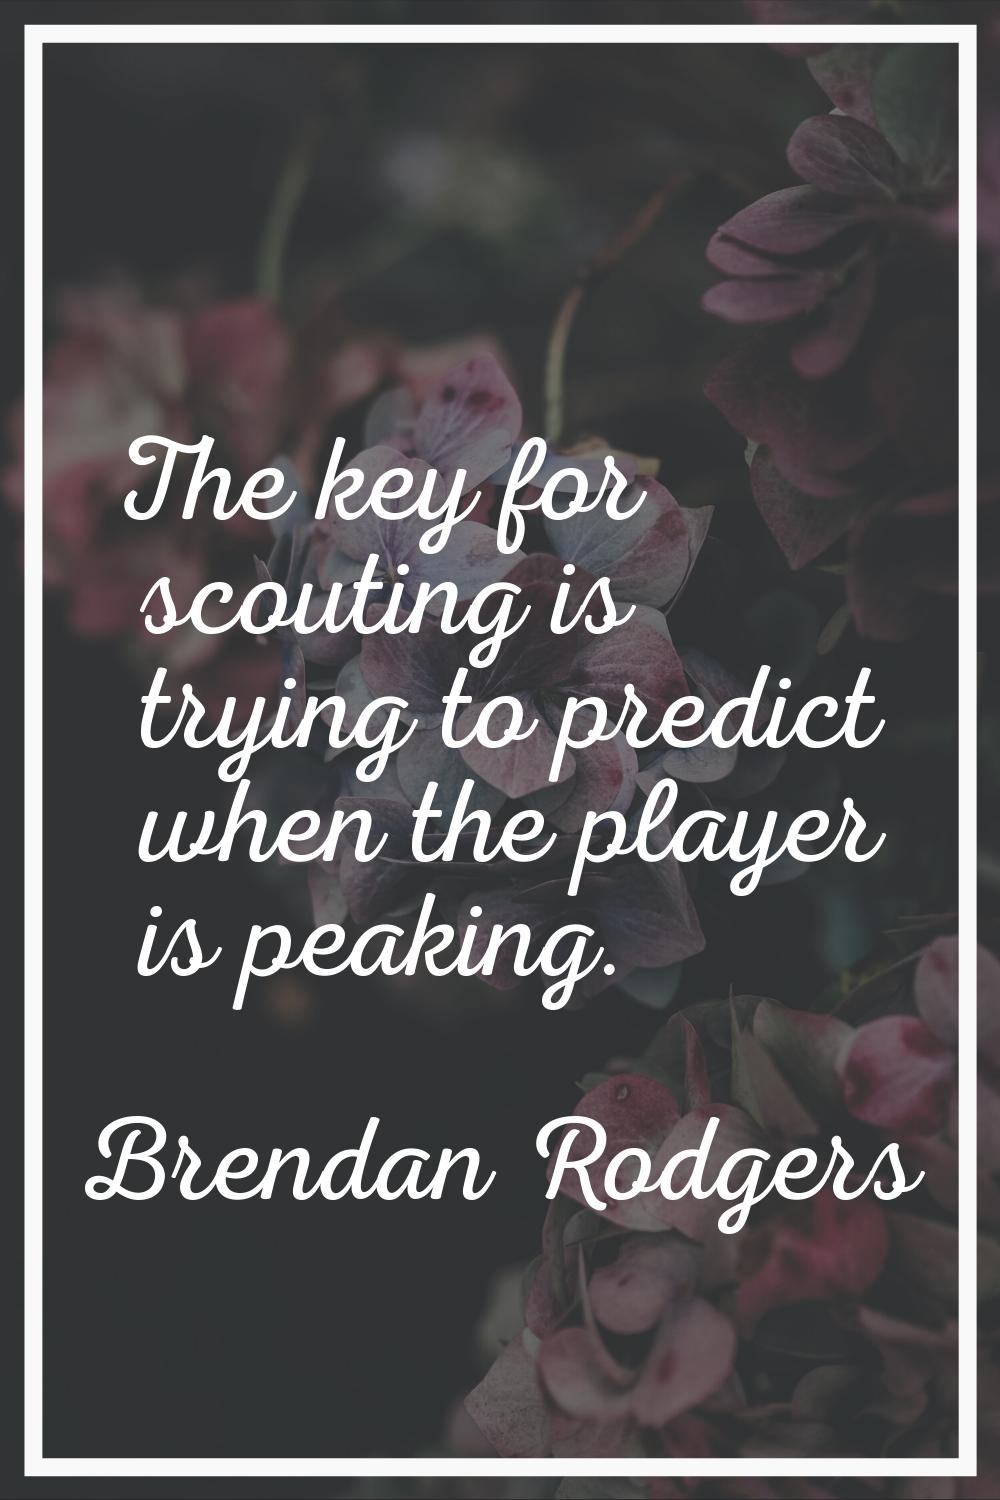 The key for scouting is trying to predict when the player is peaking.